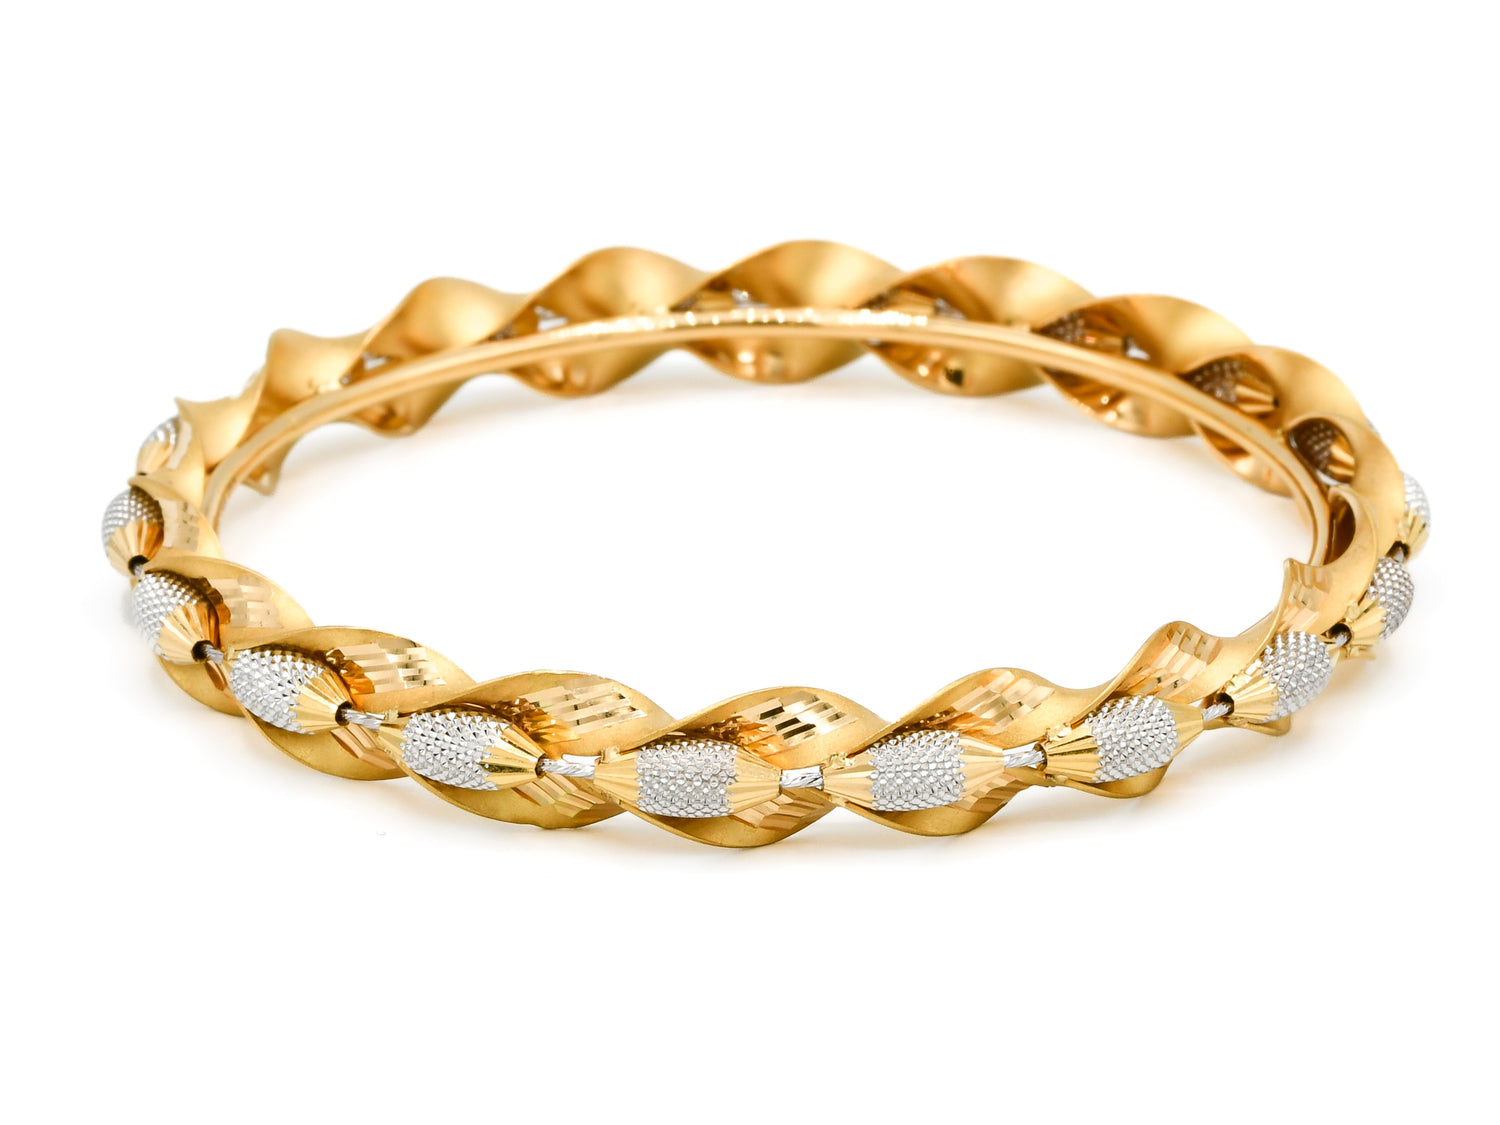 22ct Gold Two Tone 2 Piece Bangle - Roop Darshan